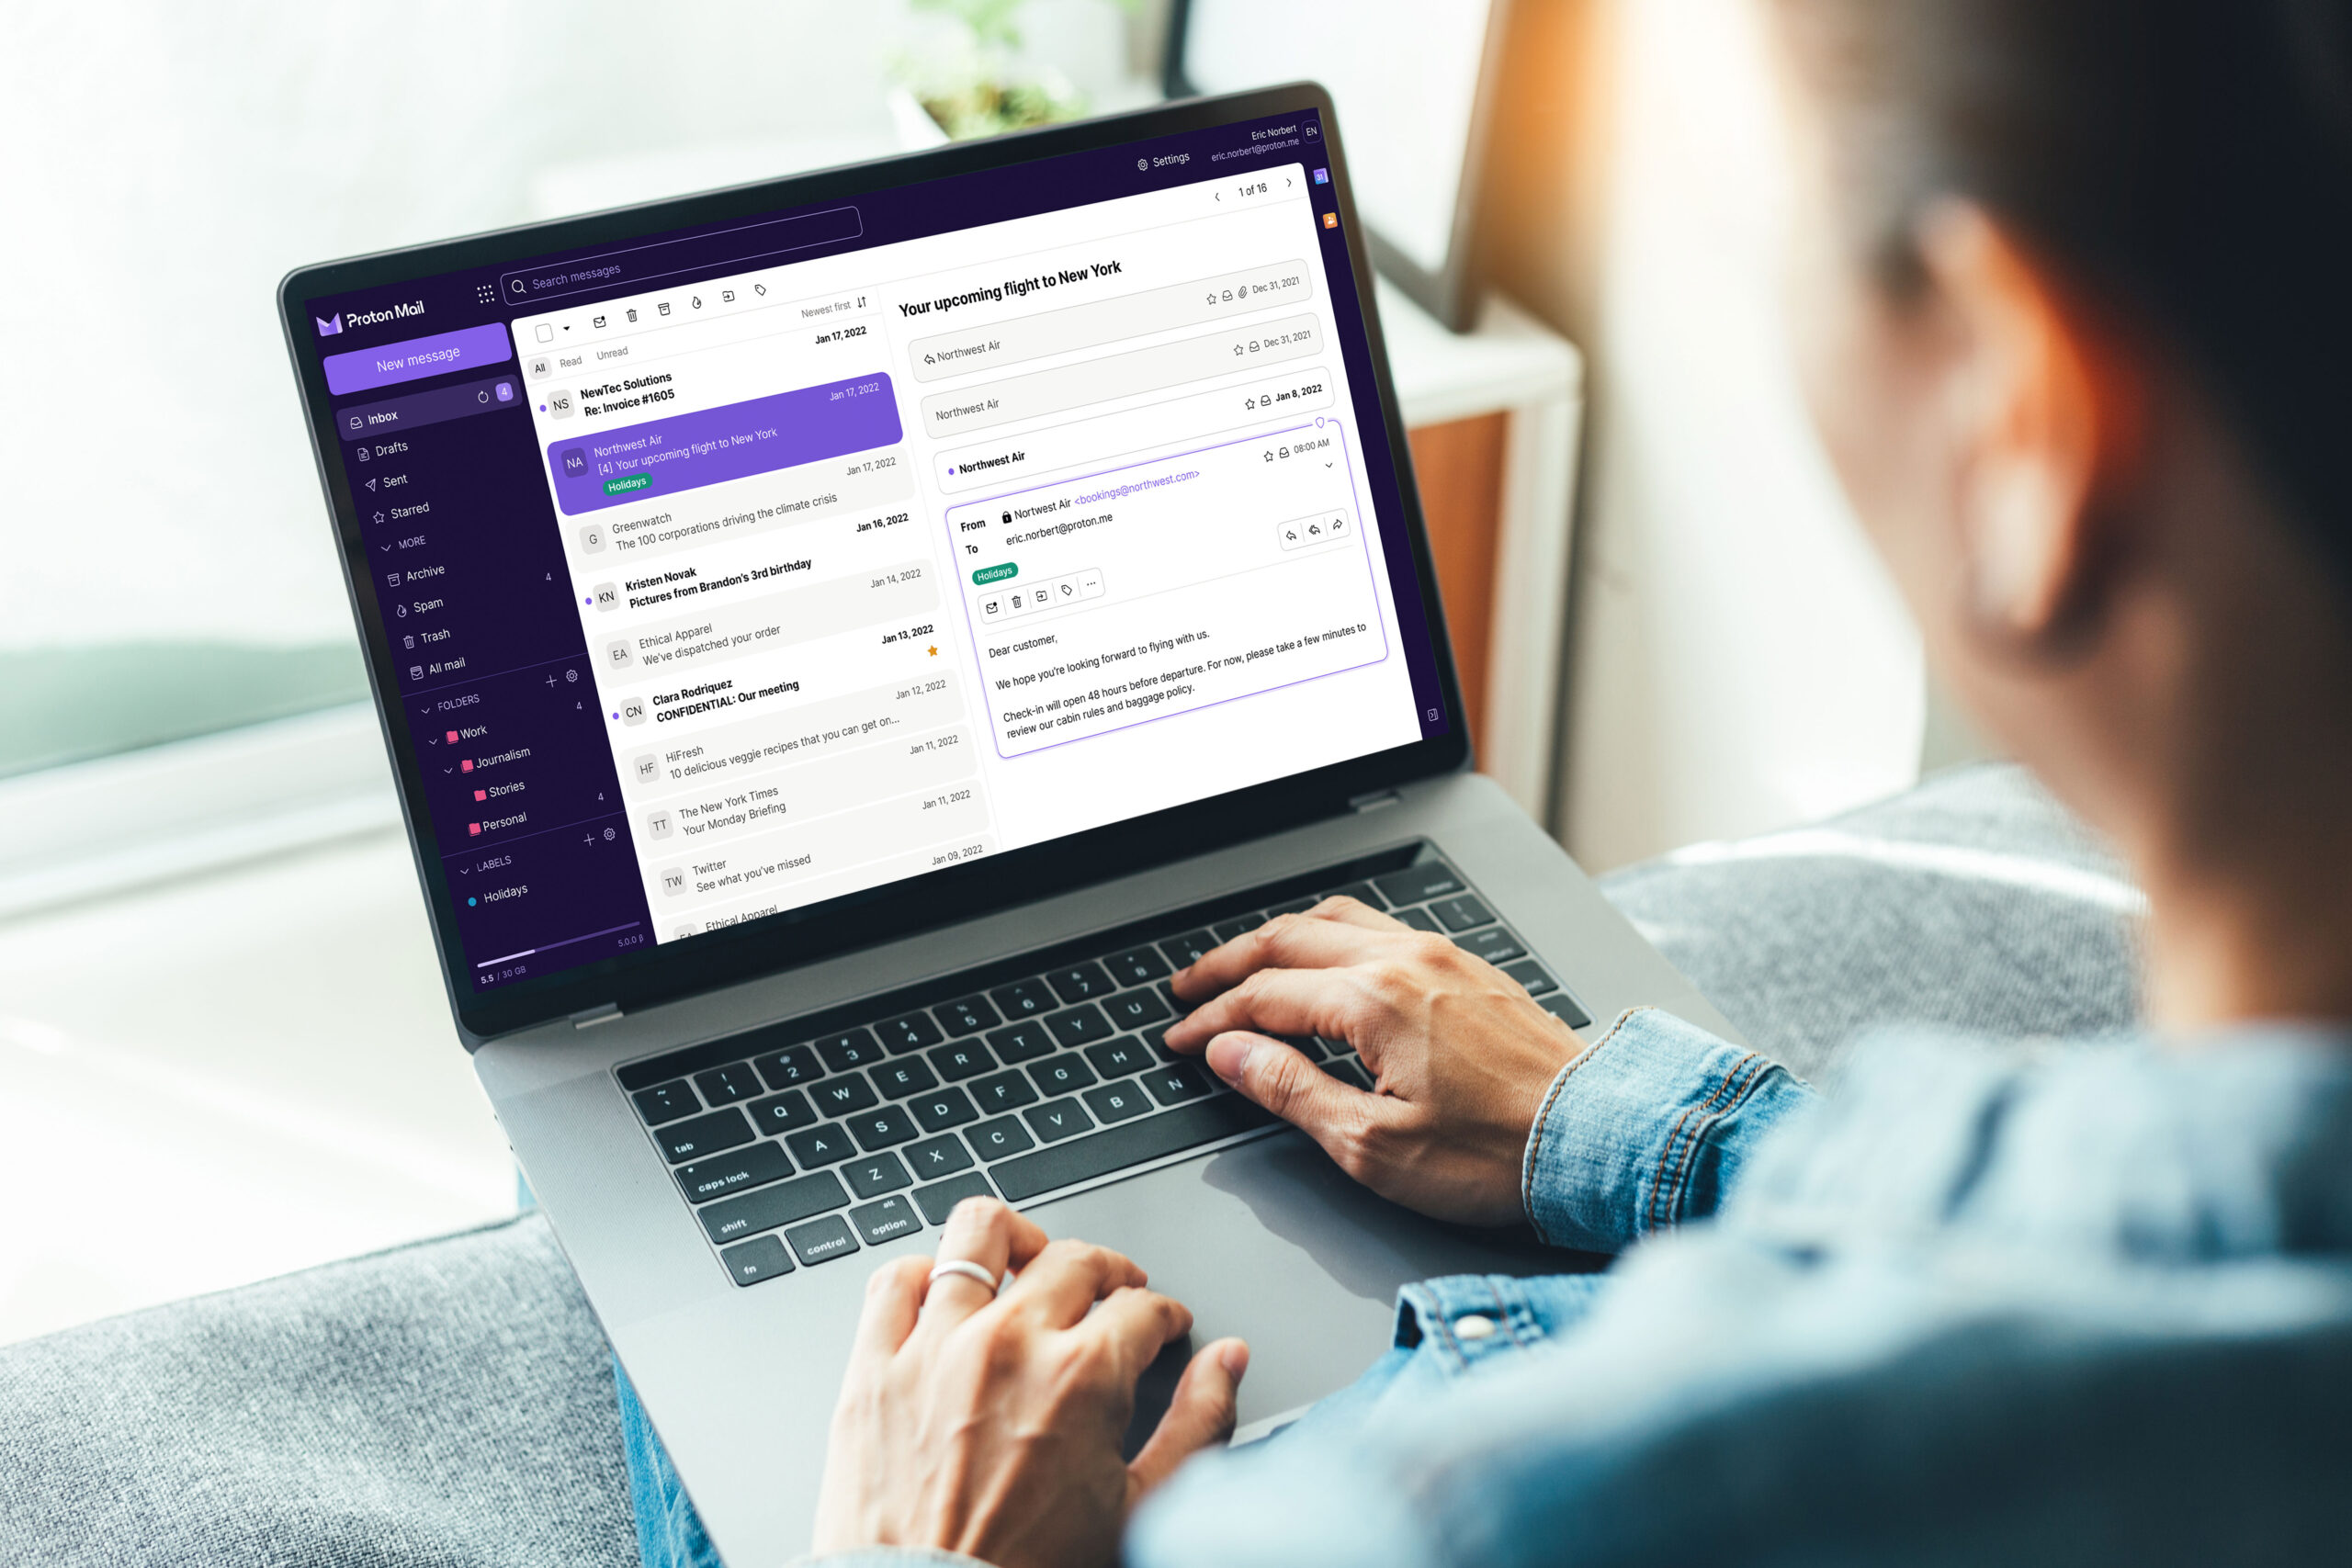 Is ProtonMail HIPAA-Compliant?